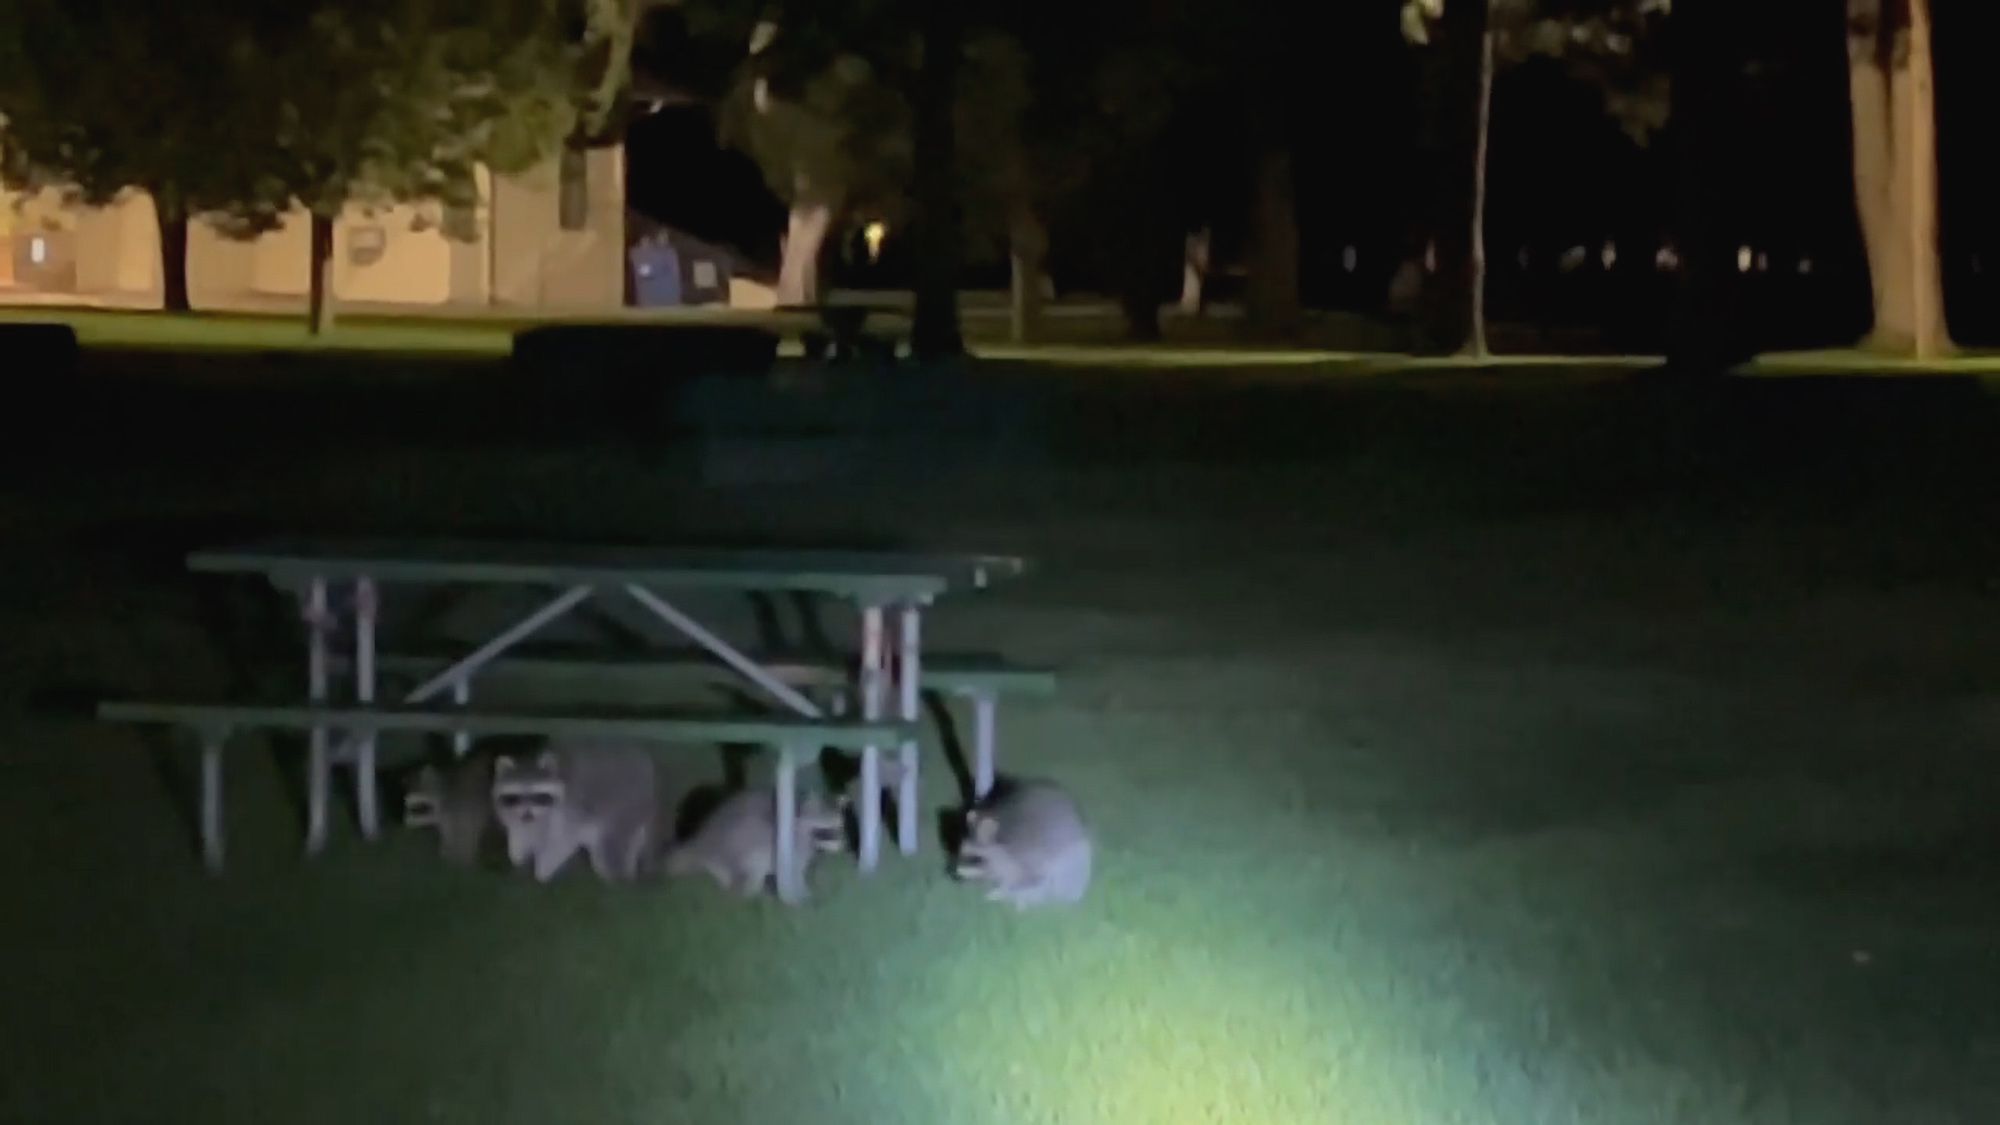 Read more about the article RACC OFF YOU LOT: Cop Slings Rowdy Raccoons Out Of Park